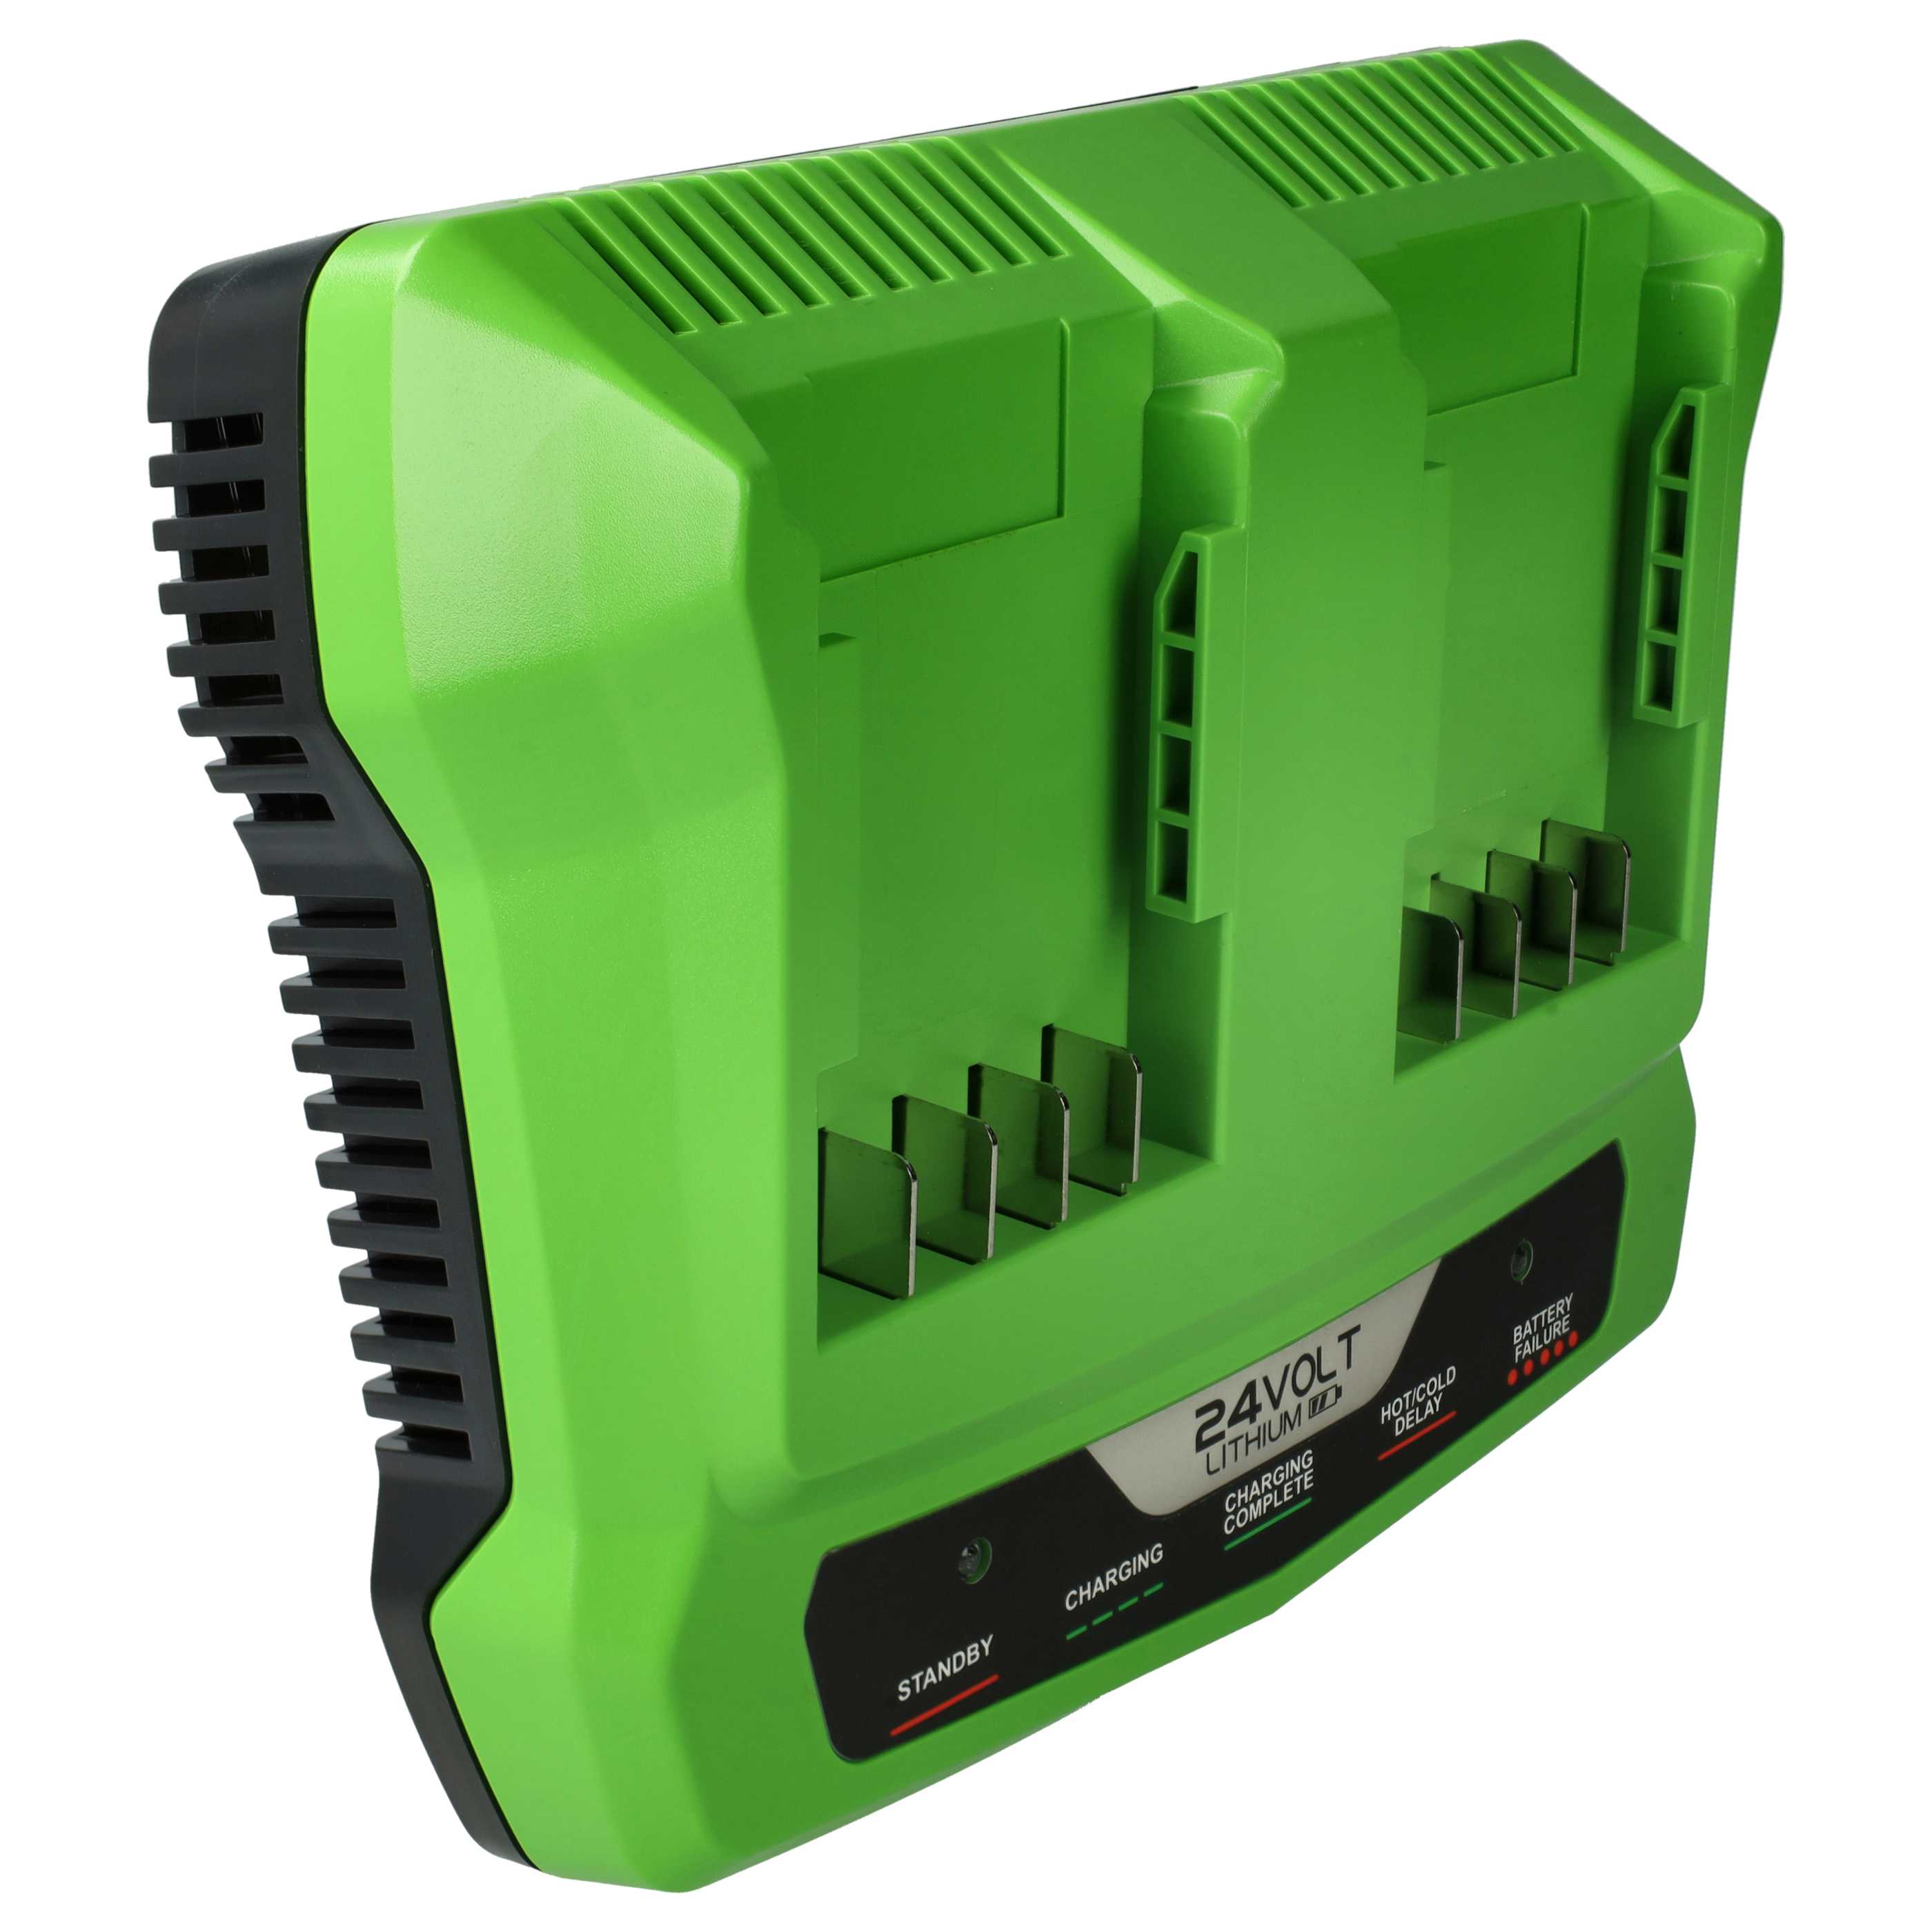 Dual Charger replaces Alpina C24 Li, CG 24 for AlpinaPower Tool Batteries etc. Li-Ion 24 V